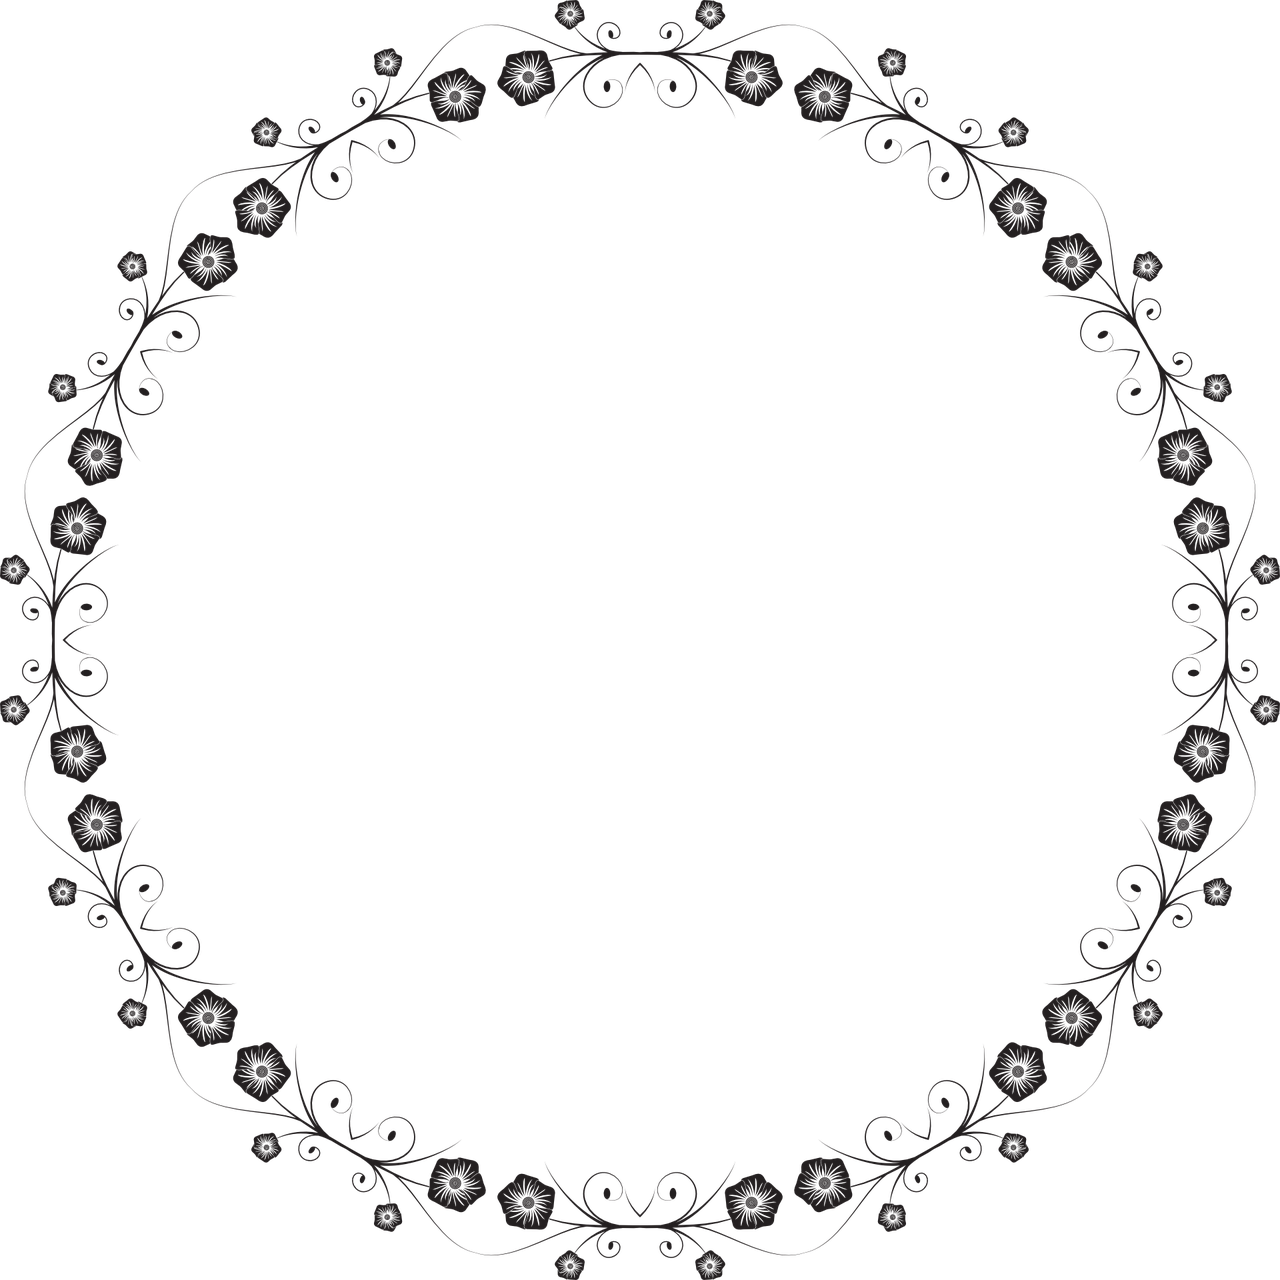 A Black Circle With Flowers